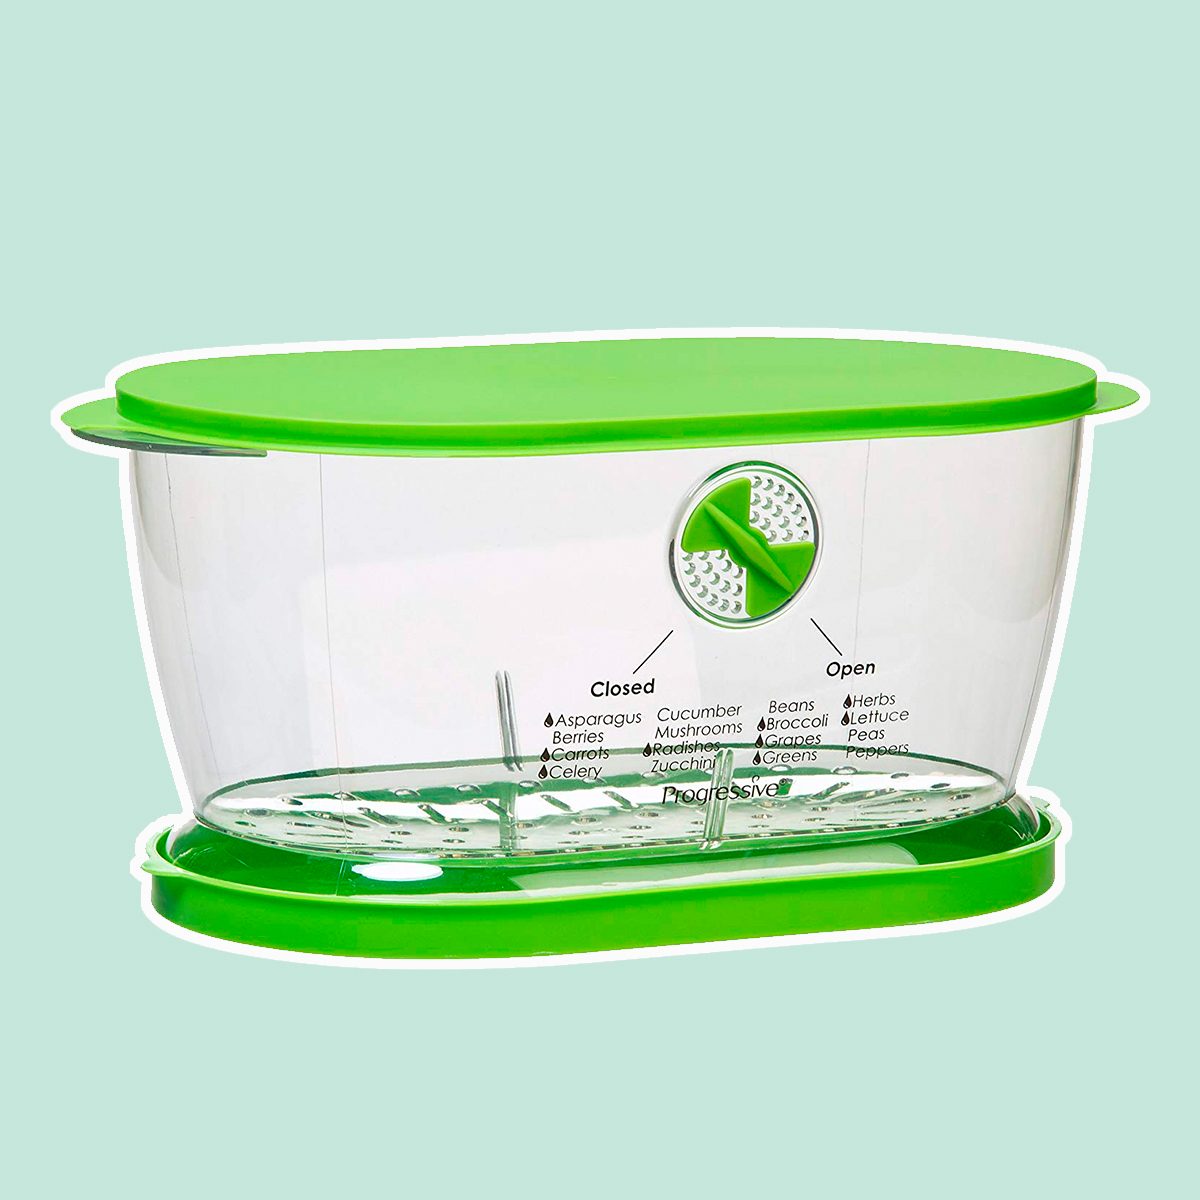 JOIE Salad To Go Lunch Container Box Salad Bowls With Compartments